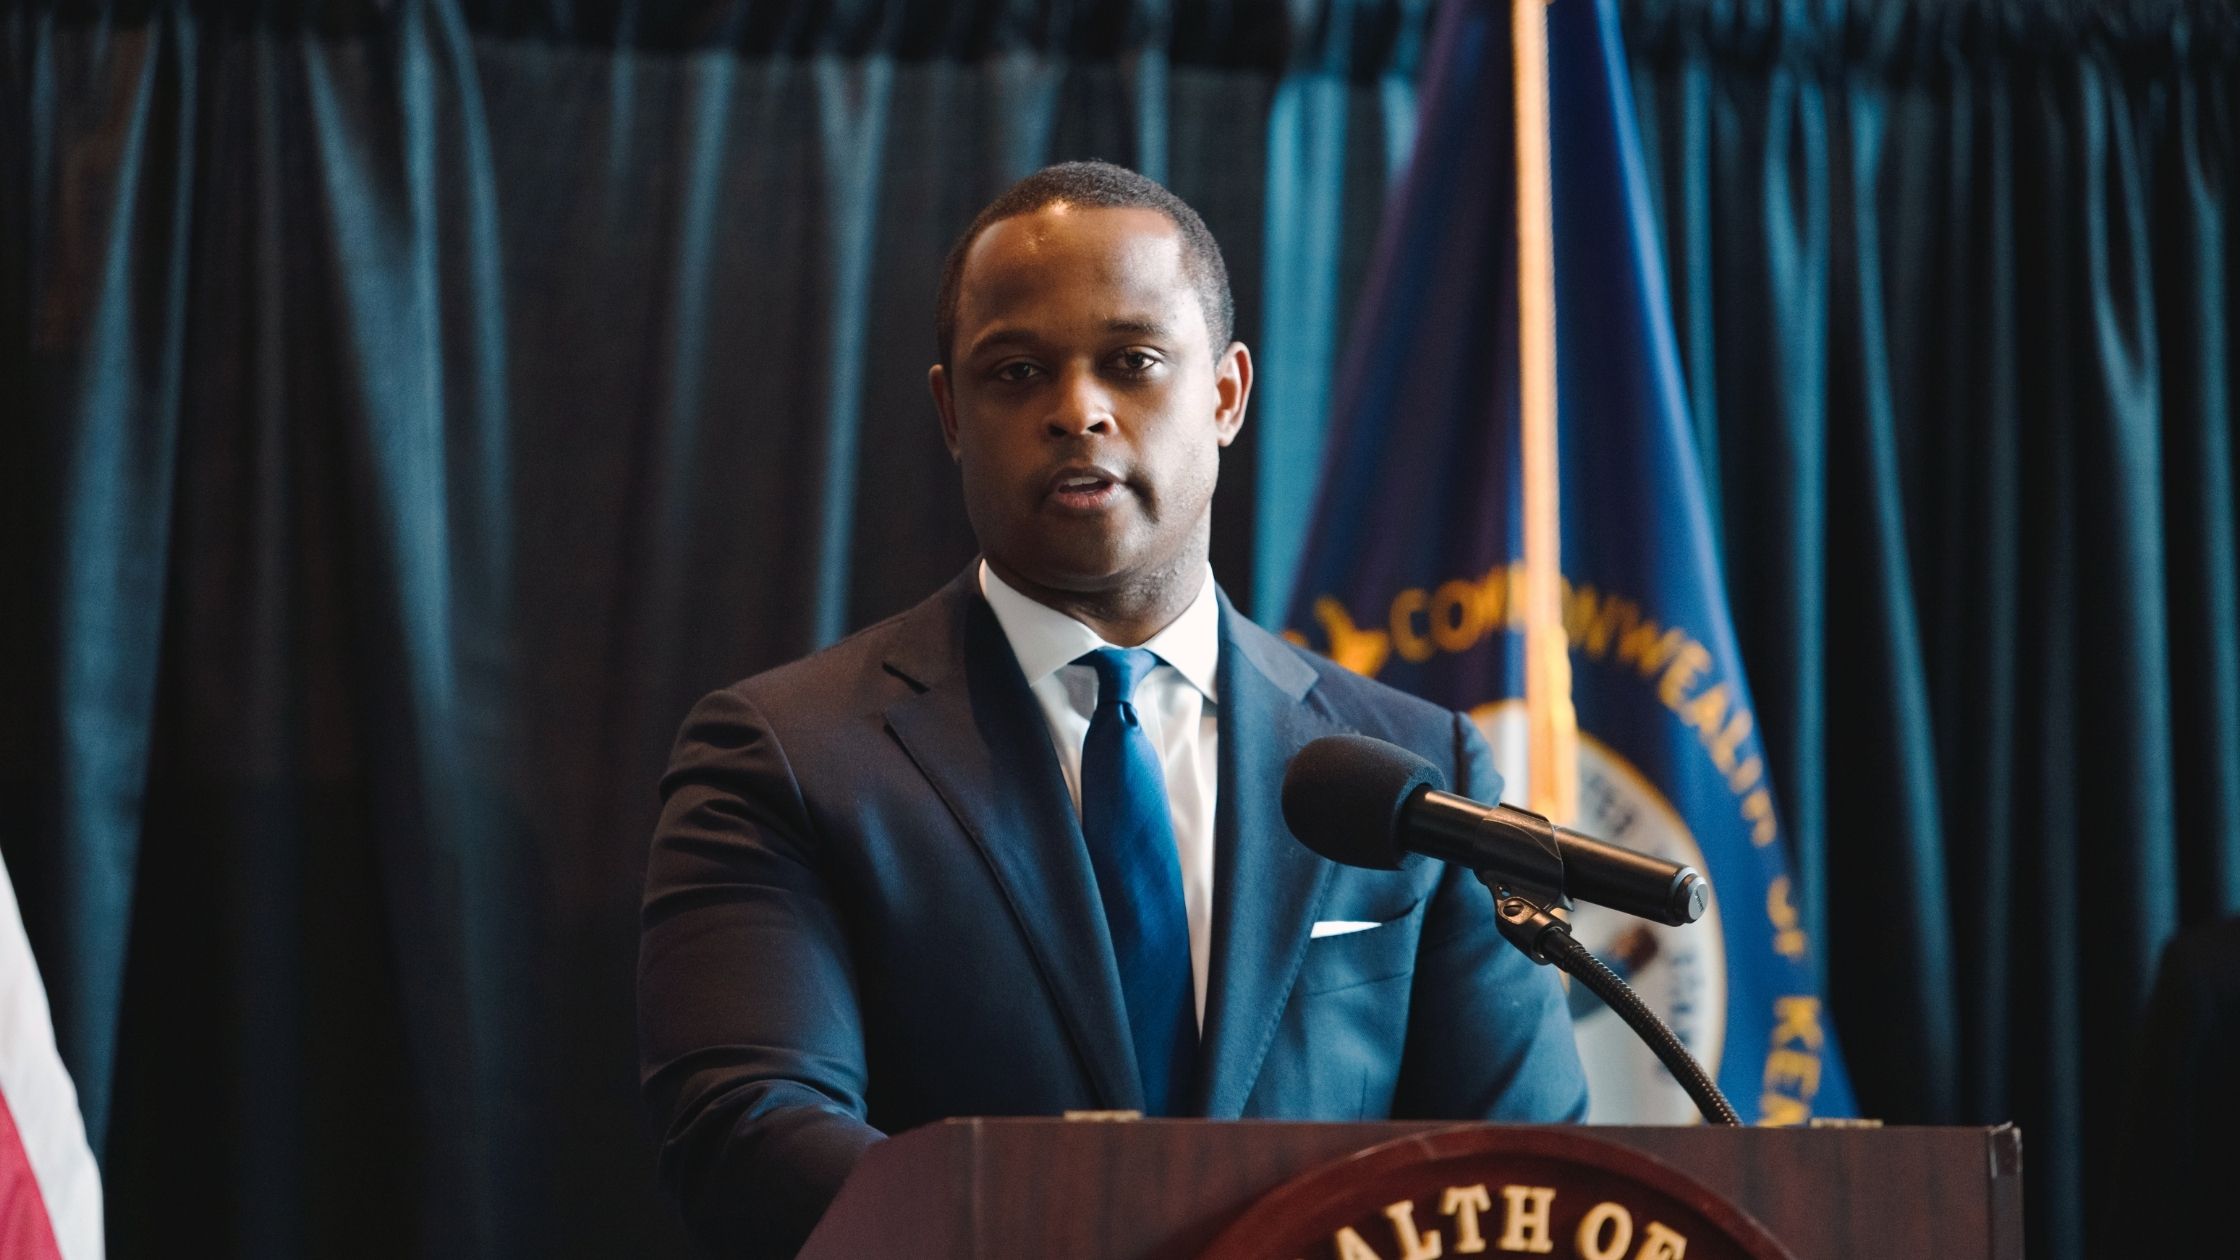 Kentucky Attorney General Daniel Cameron speaks during a press conference to announce a grand jury's decision to indict one of three Louisville Metro Police Department officers involved in the shooting death of Breonna Taylor on Sept. 23 in Frankfort, Kentucky.